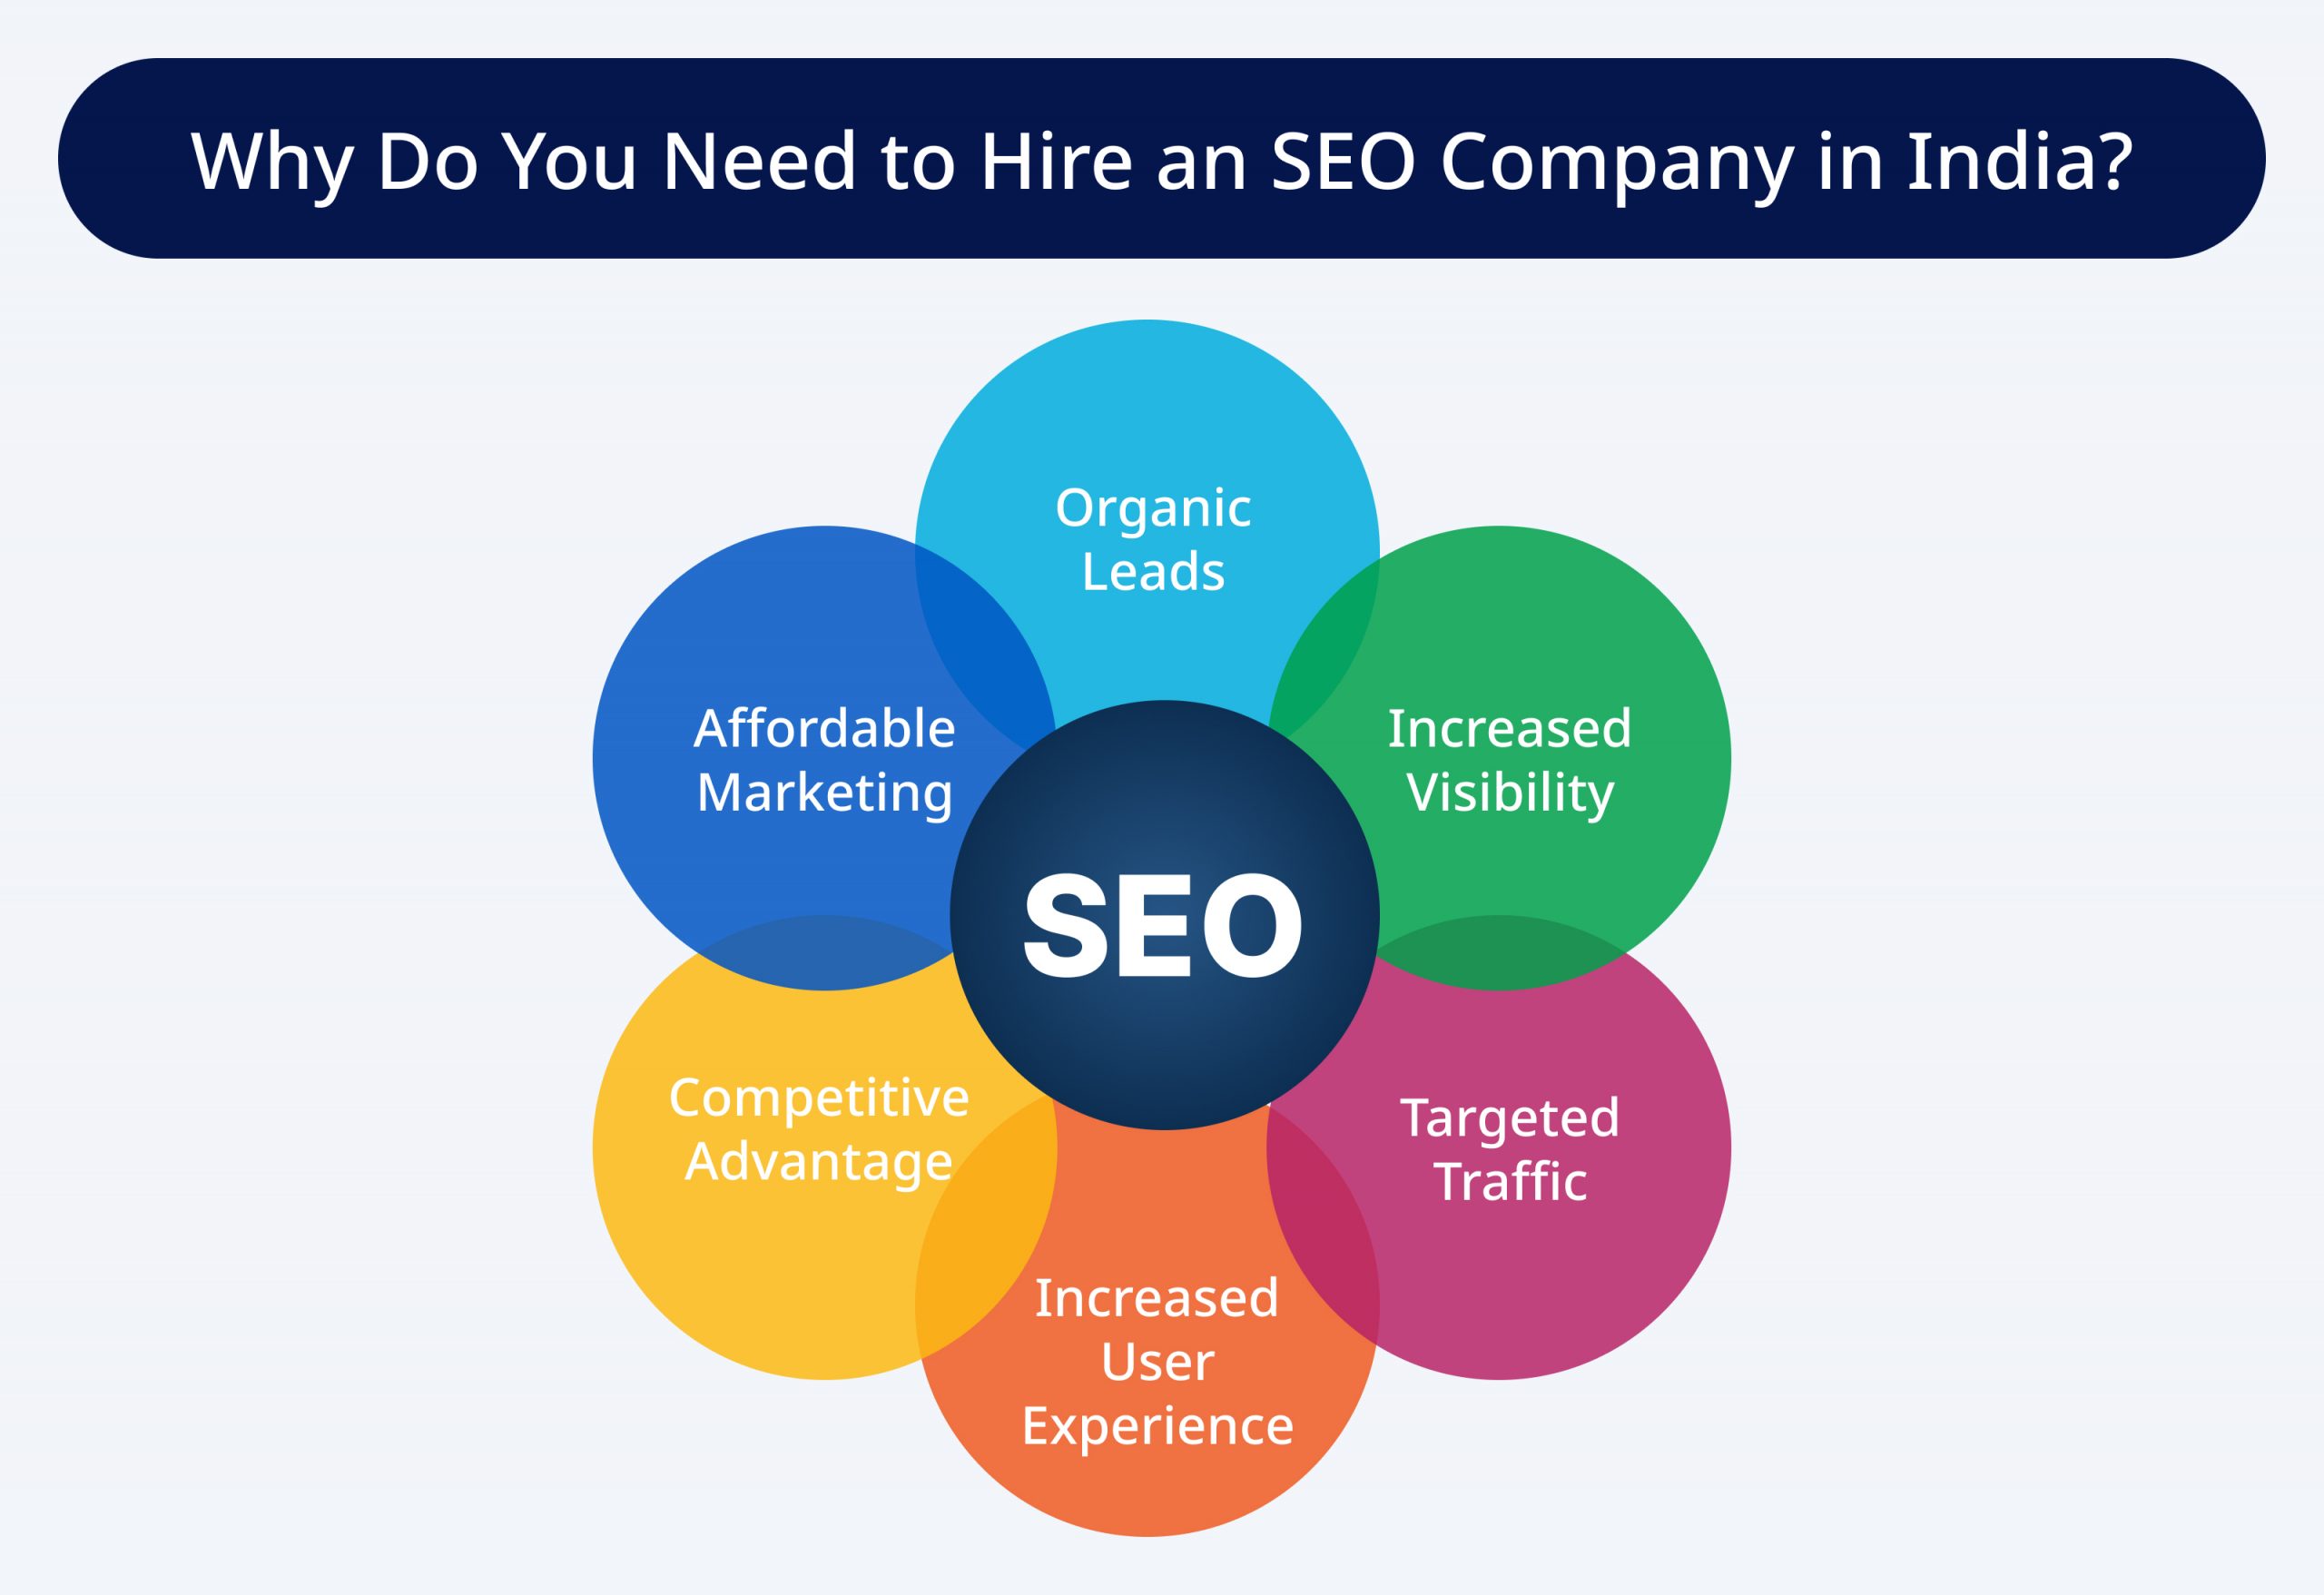 Why Do You Need to Hire an SEO Company in India